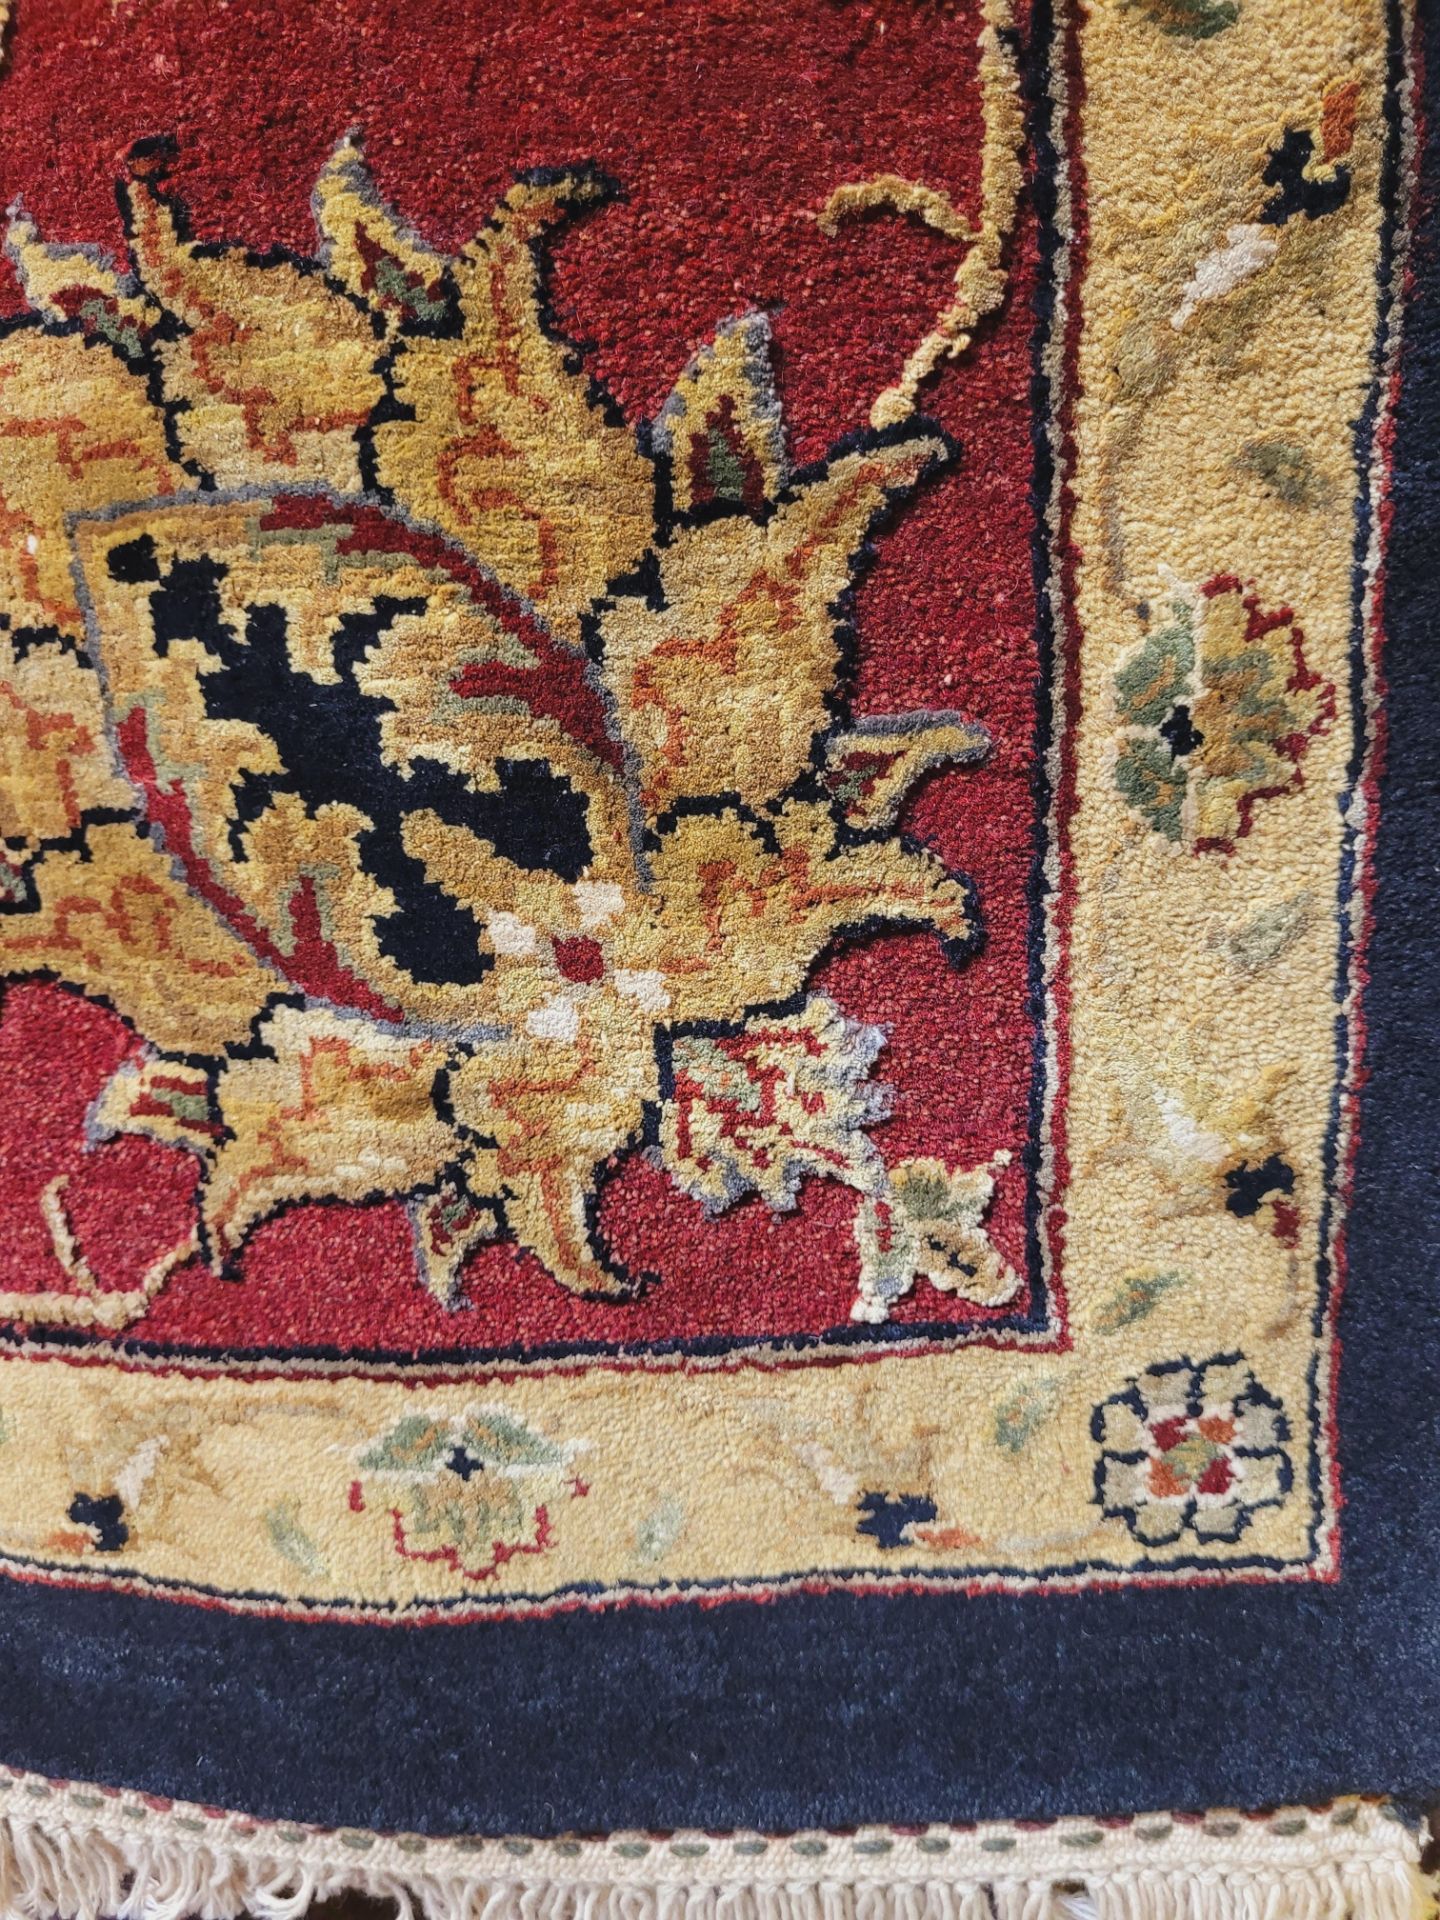 8'10" X 12' EBONY/RED - WOOL/SILK HAND KNOTTED IN INDIA - MSRP $13,475.00 (LOCATED IN GALLERY - Image 4 of 8